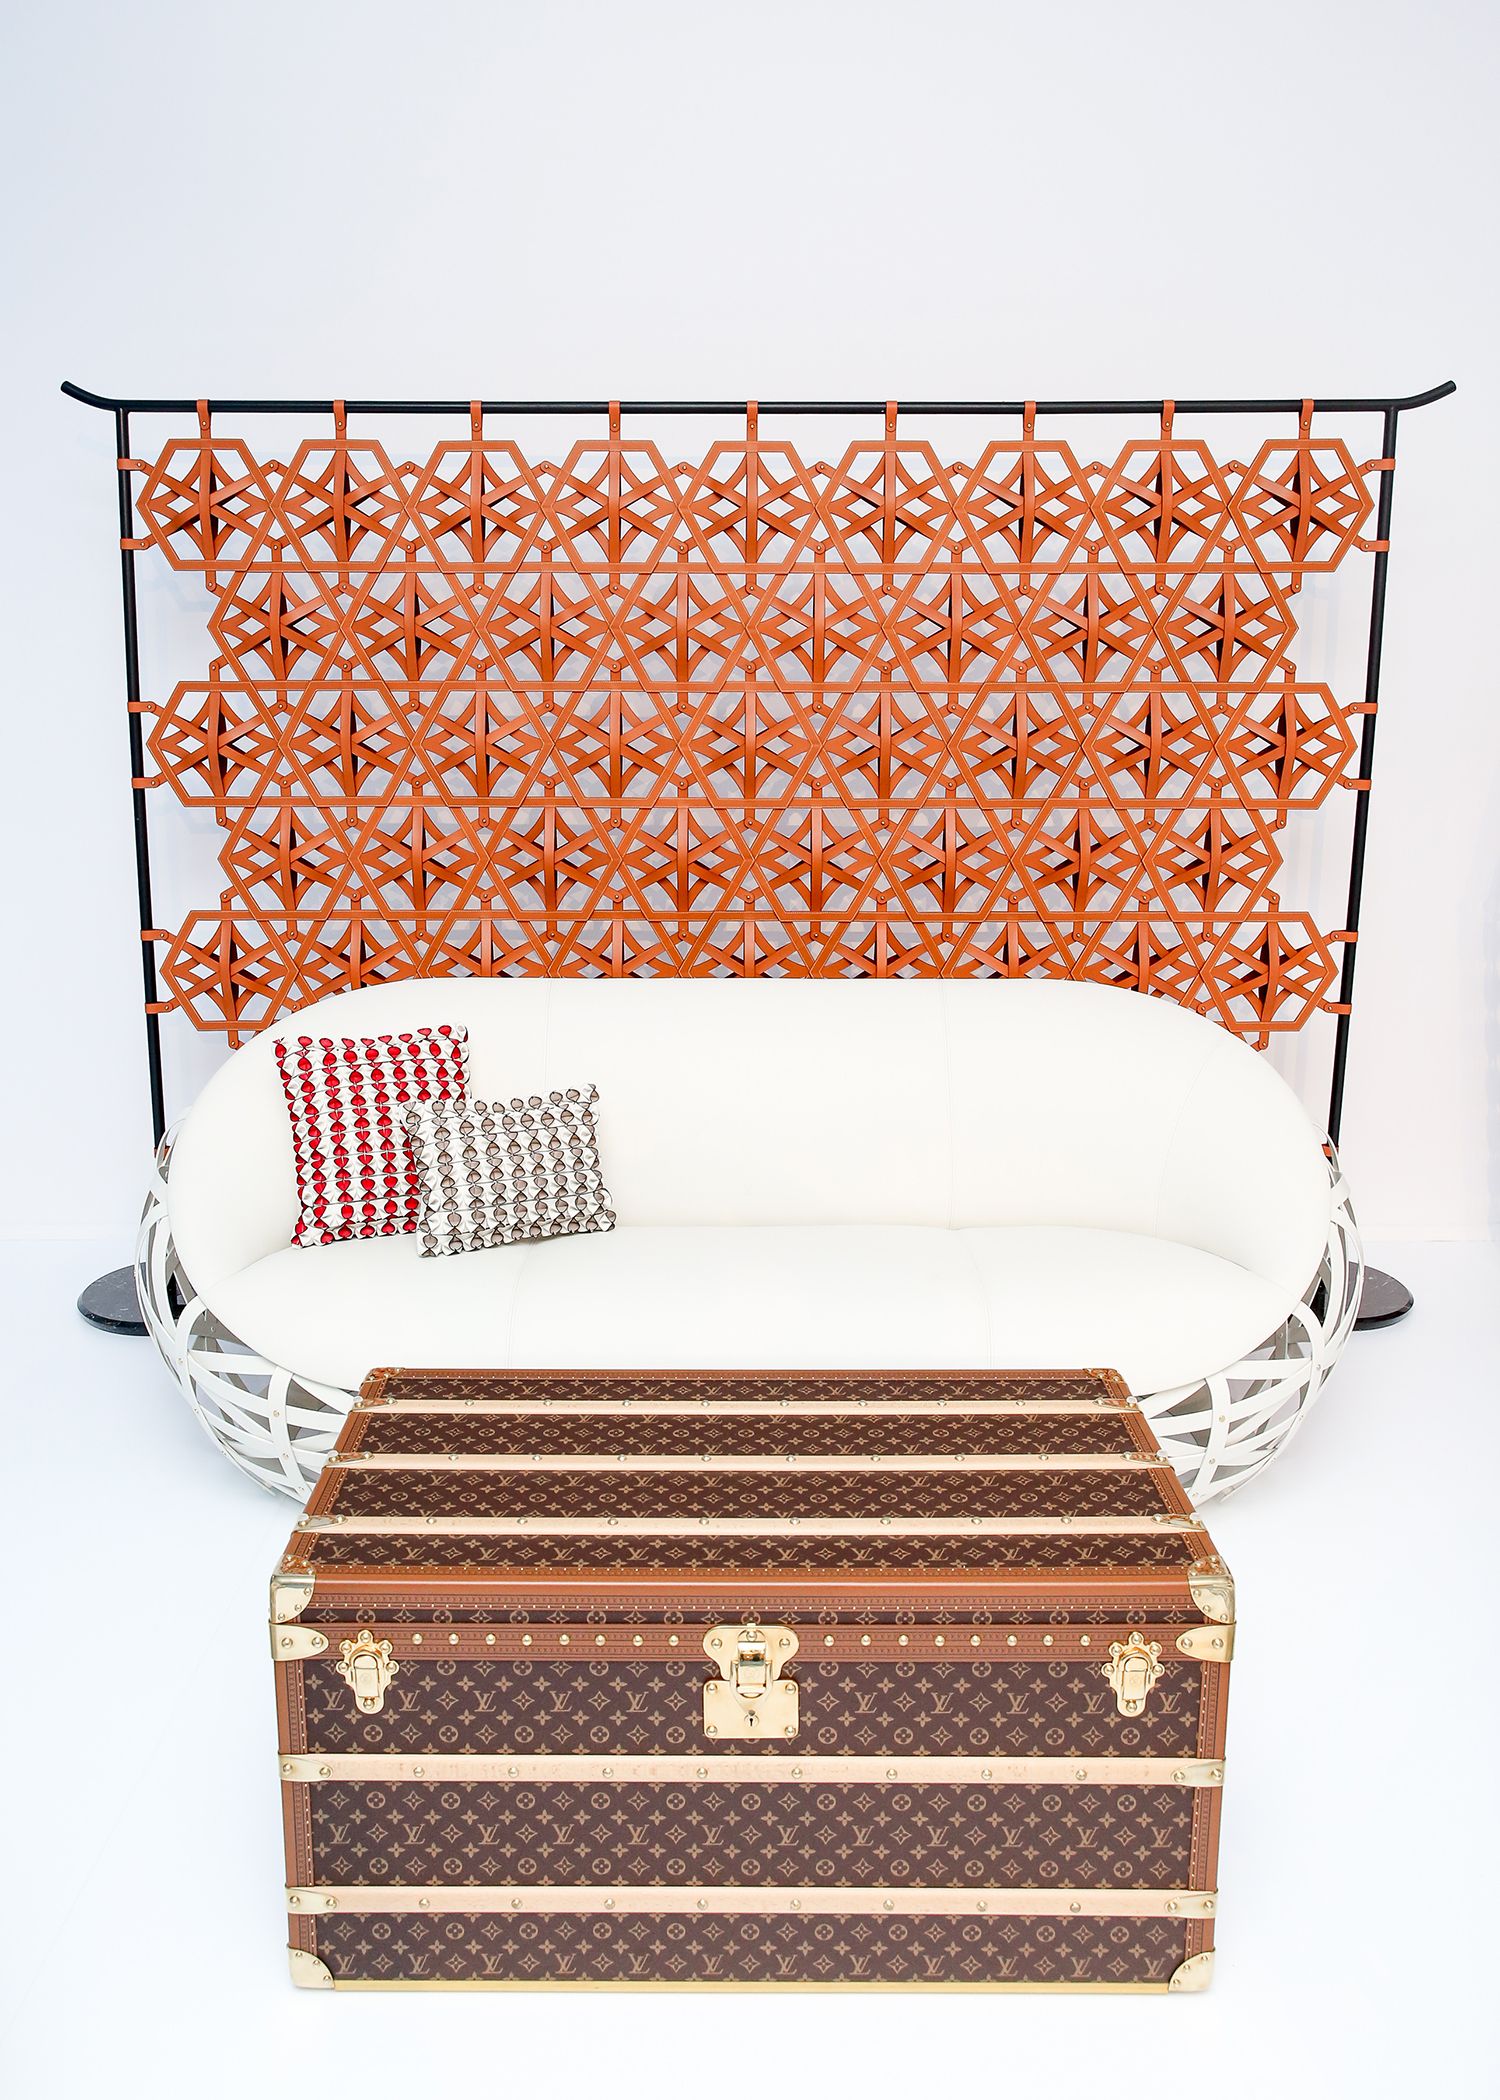 Louis Vuitton's Objets Nomades Collection is on View During Frieze LA